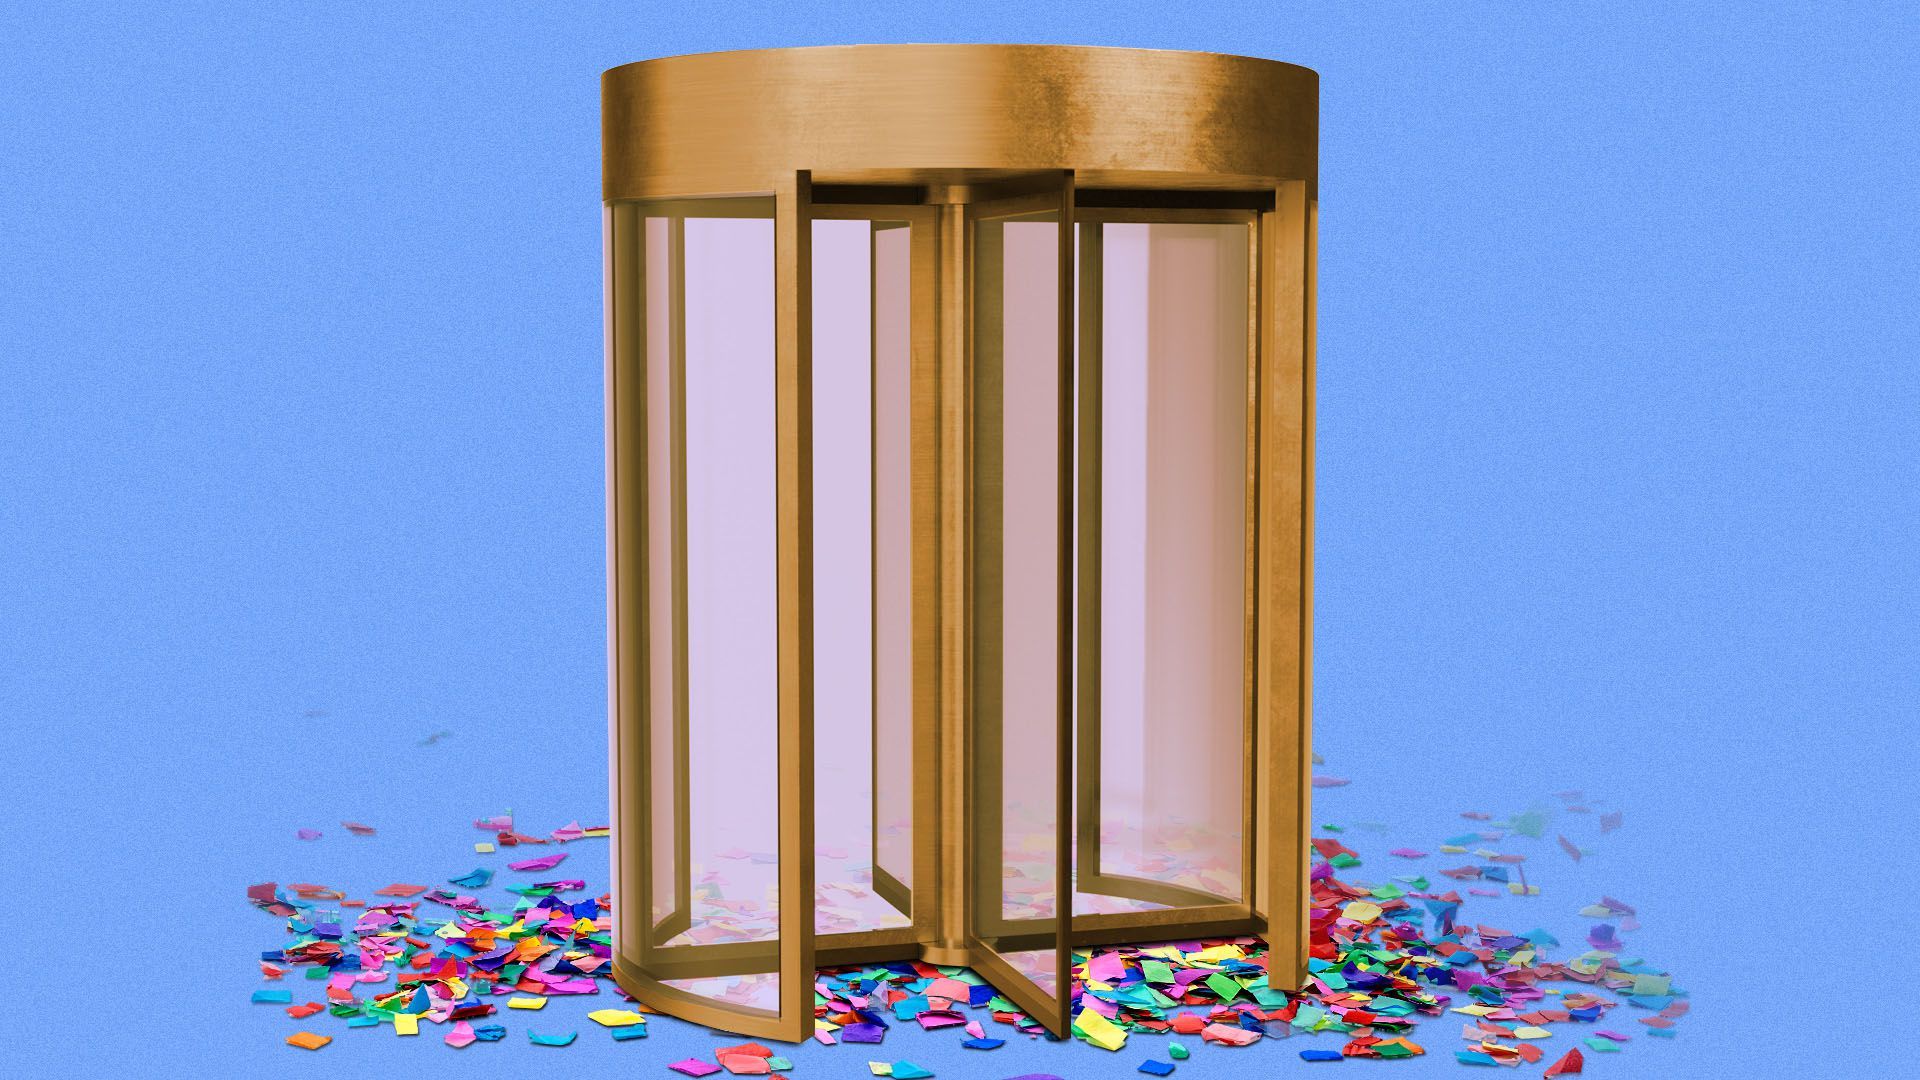 Illustration of a revolving with confetti around it